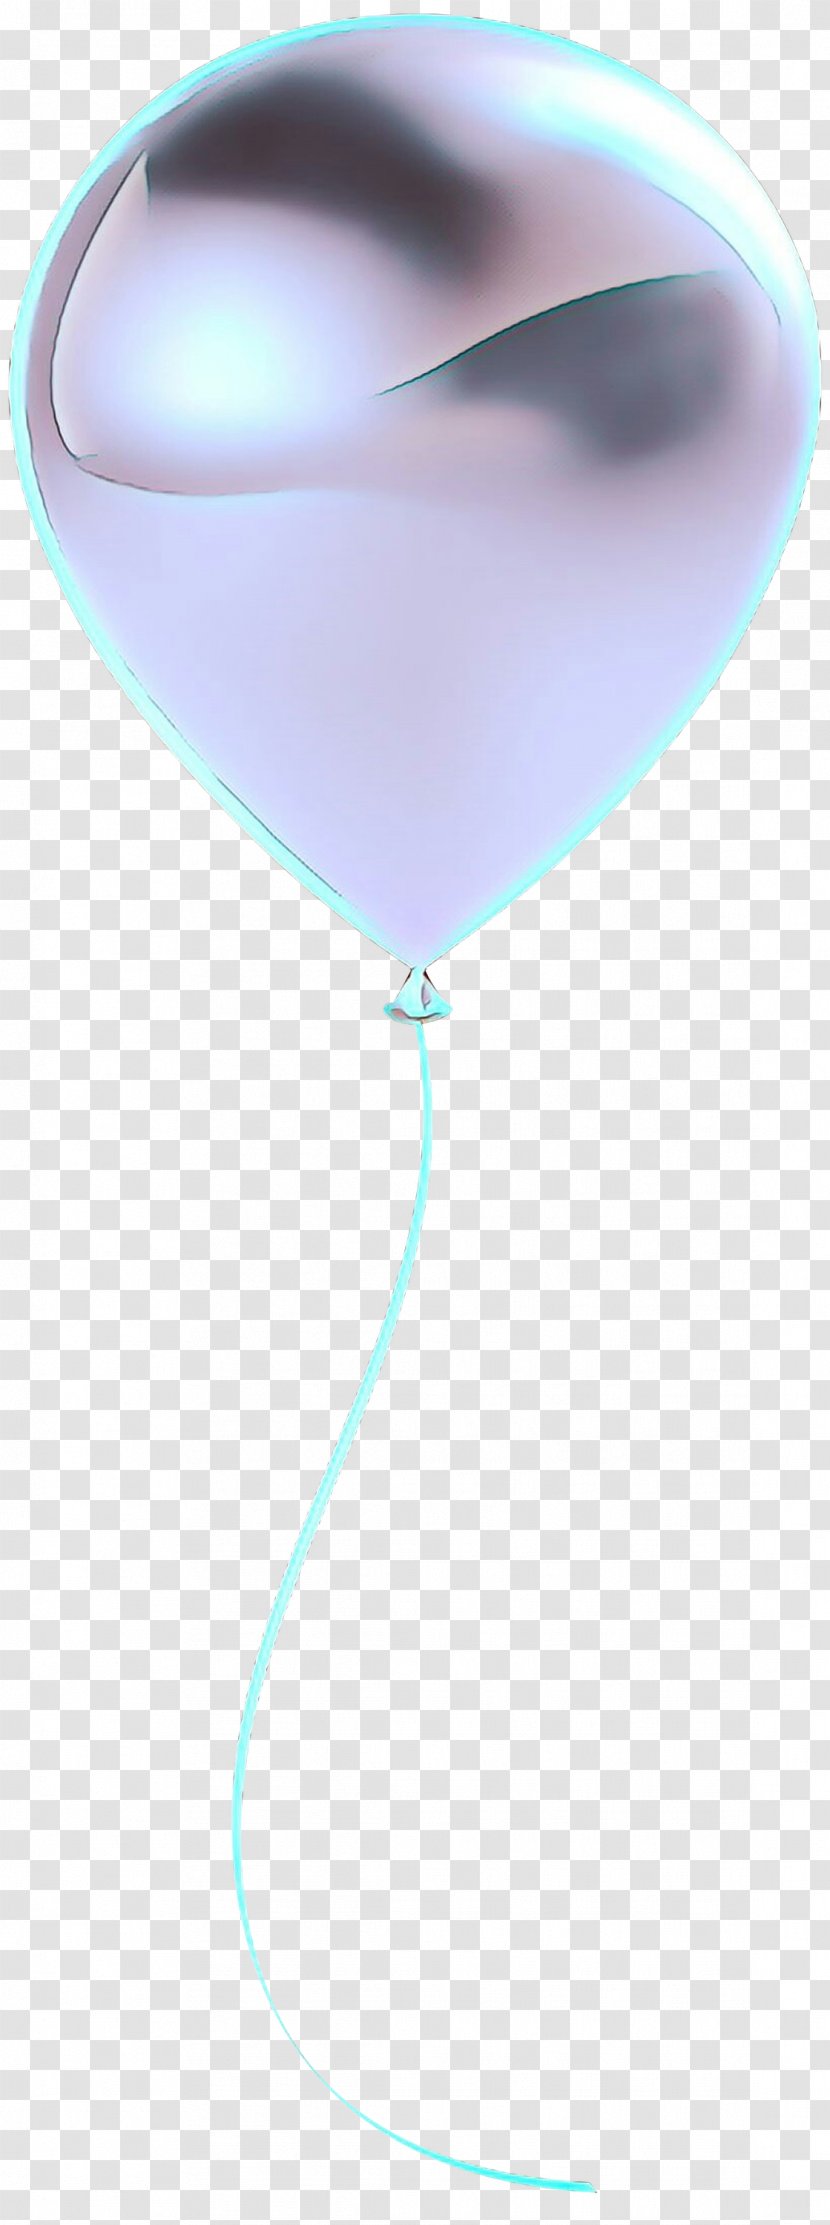 Balloon Turquoise Blue Aqua - Party Supply - Fashion Accessory Transparent PNG